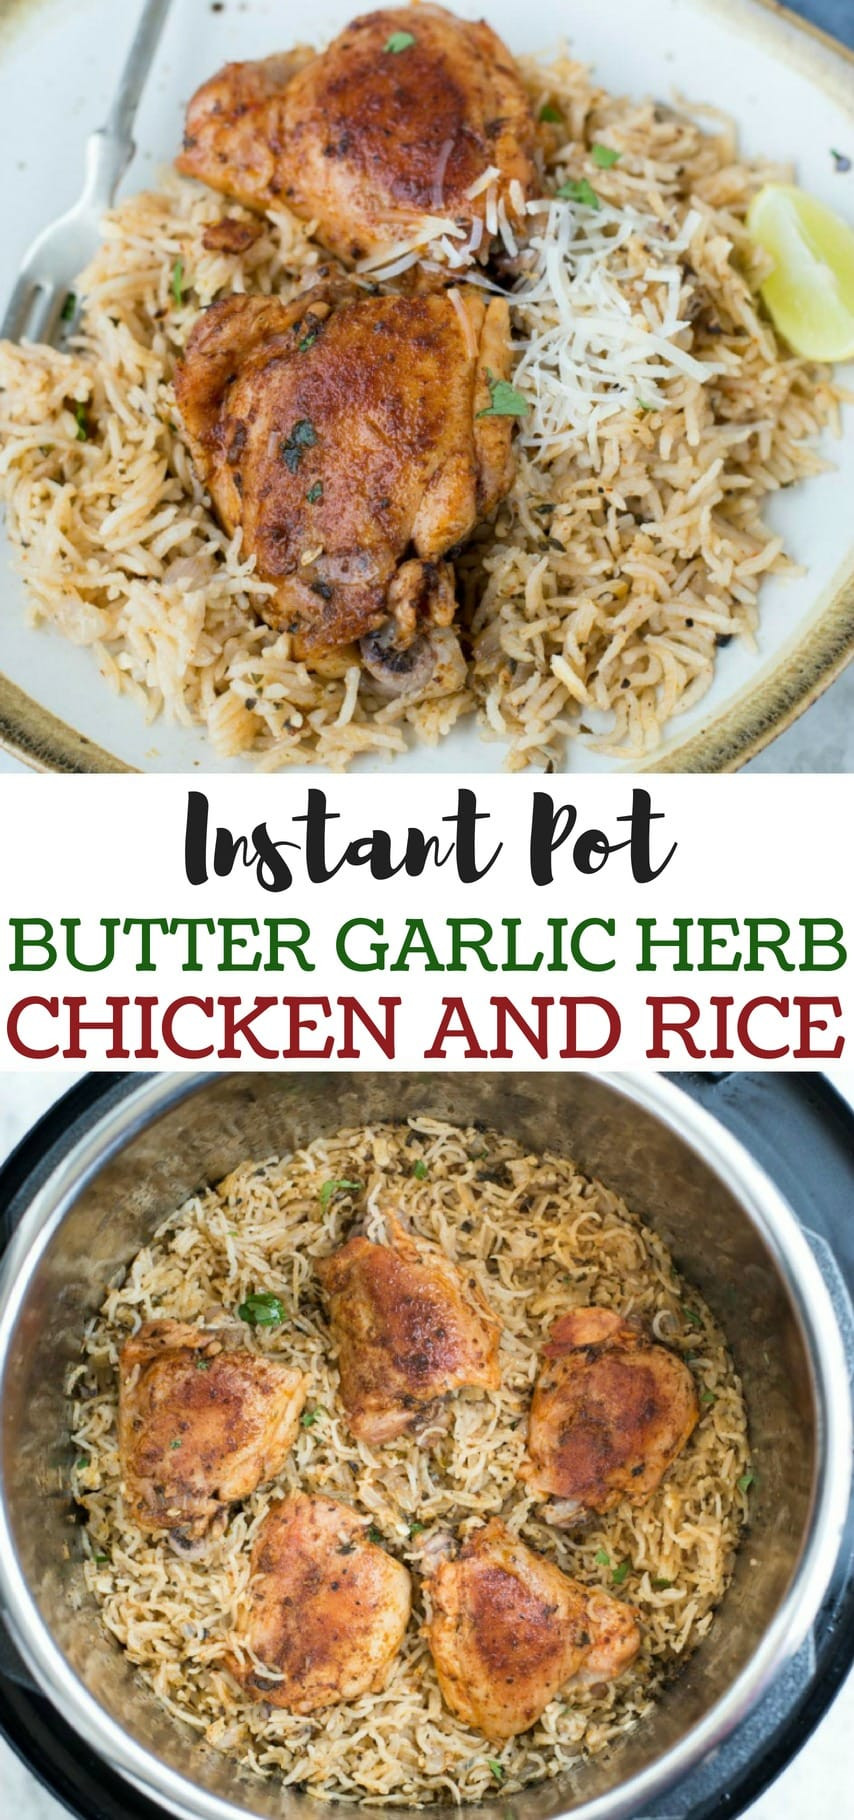 Instant Pot Chicken And Rice Recipes
 INSTANT POT GARLIC HERB CHICKEN AND RICE